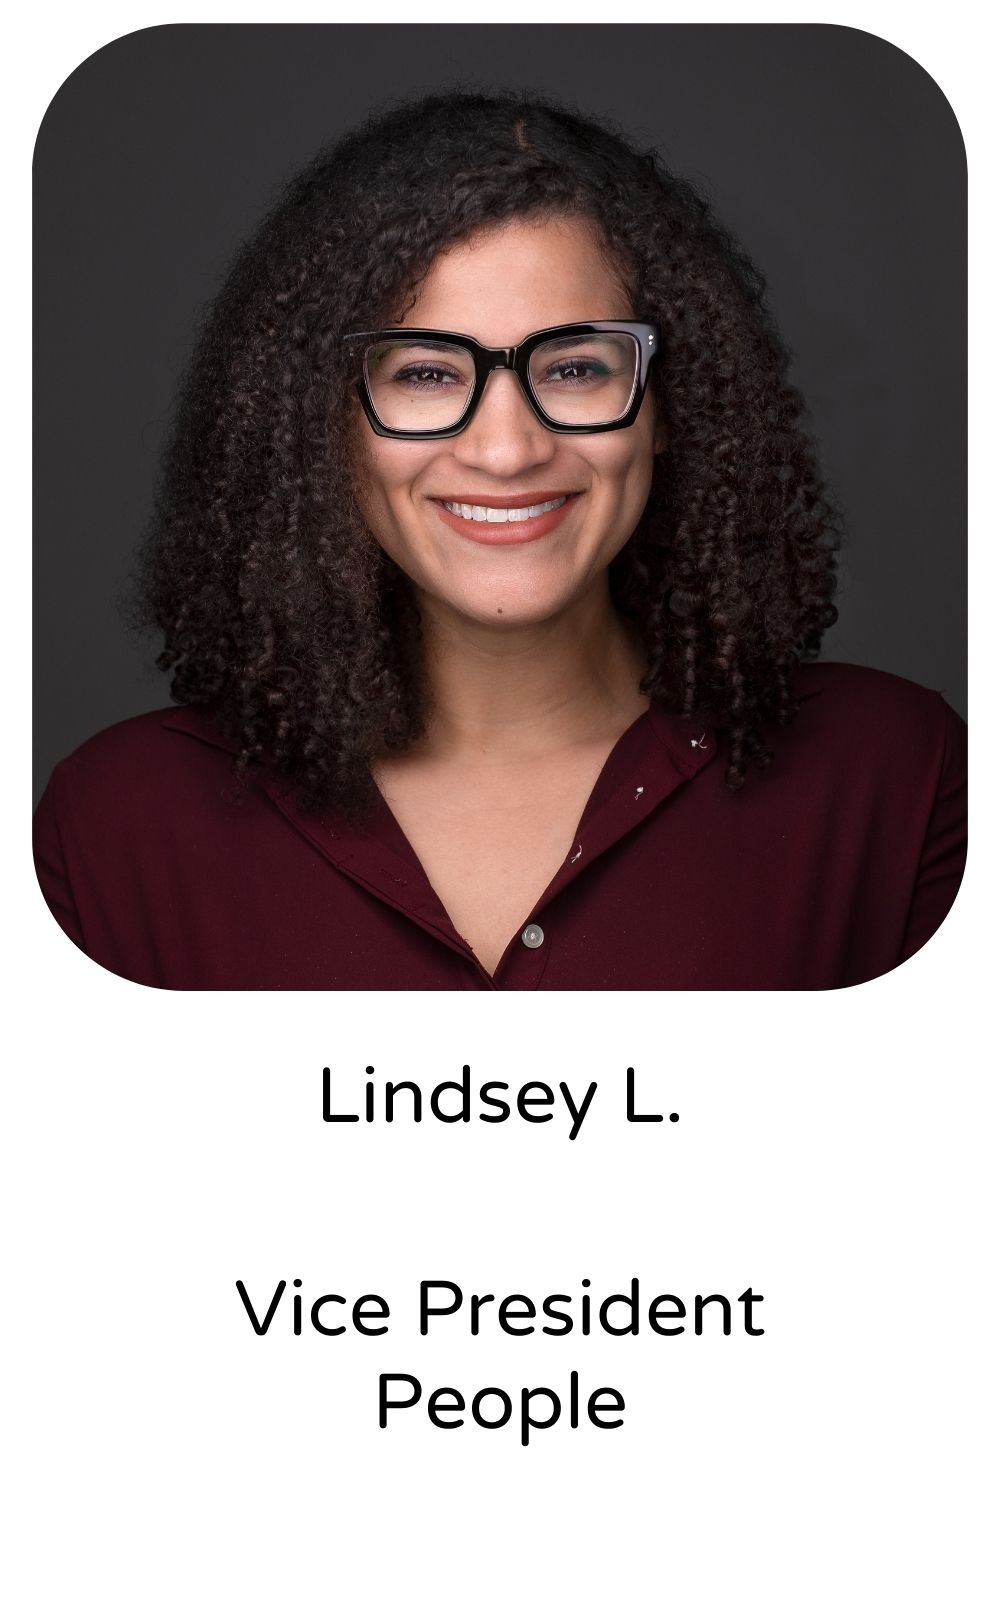 Lindsey L, Vice President, People